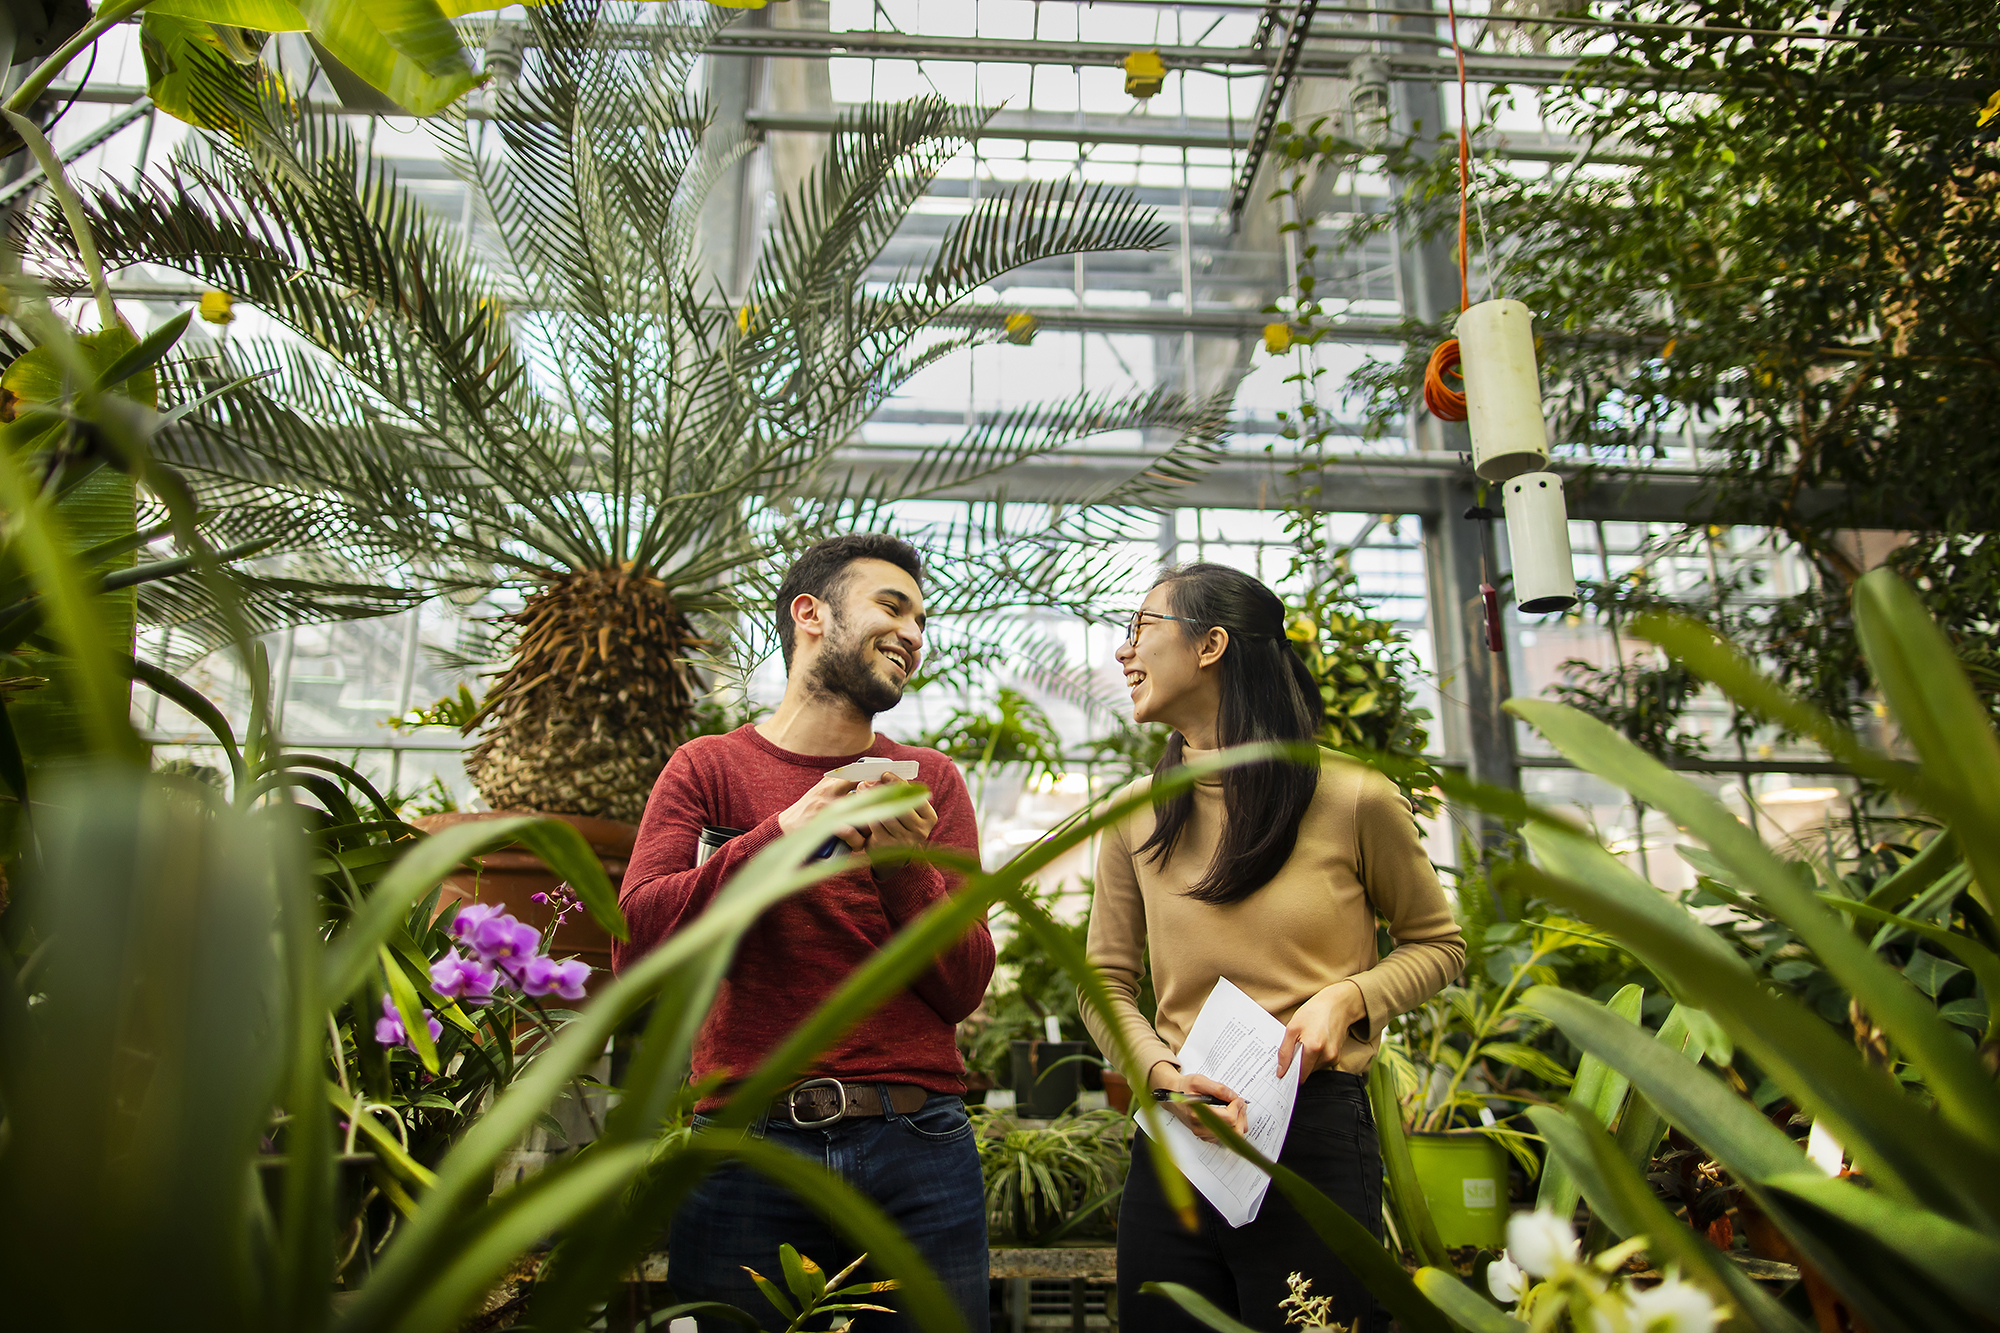 Two people smile at one another framed by plants in a greenhouse. One holds paper she is writing on.